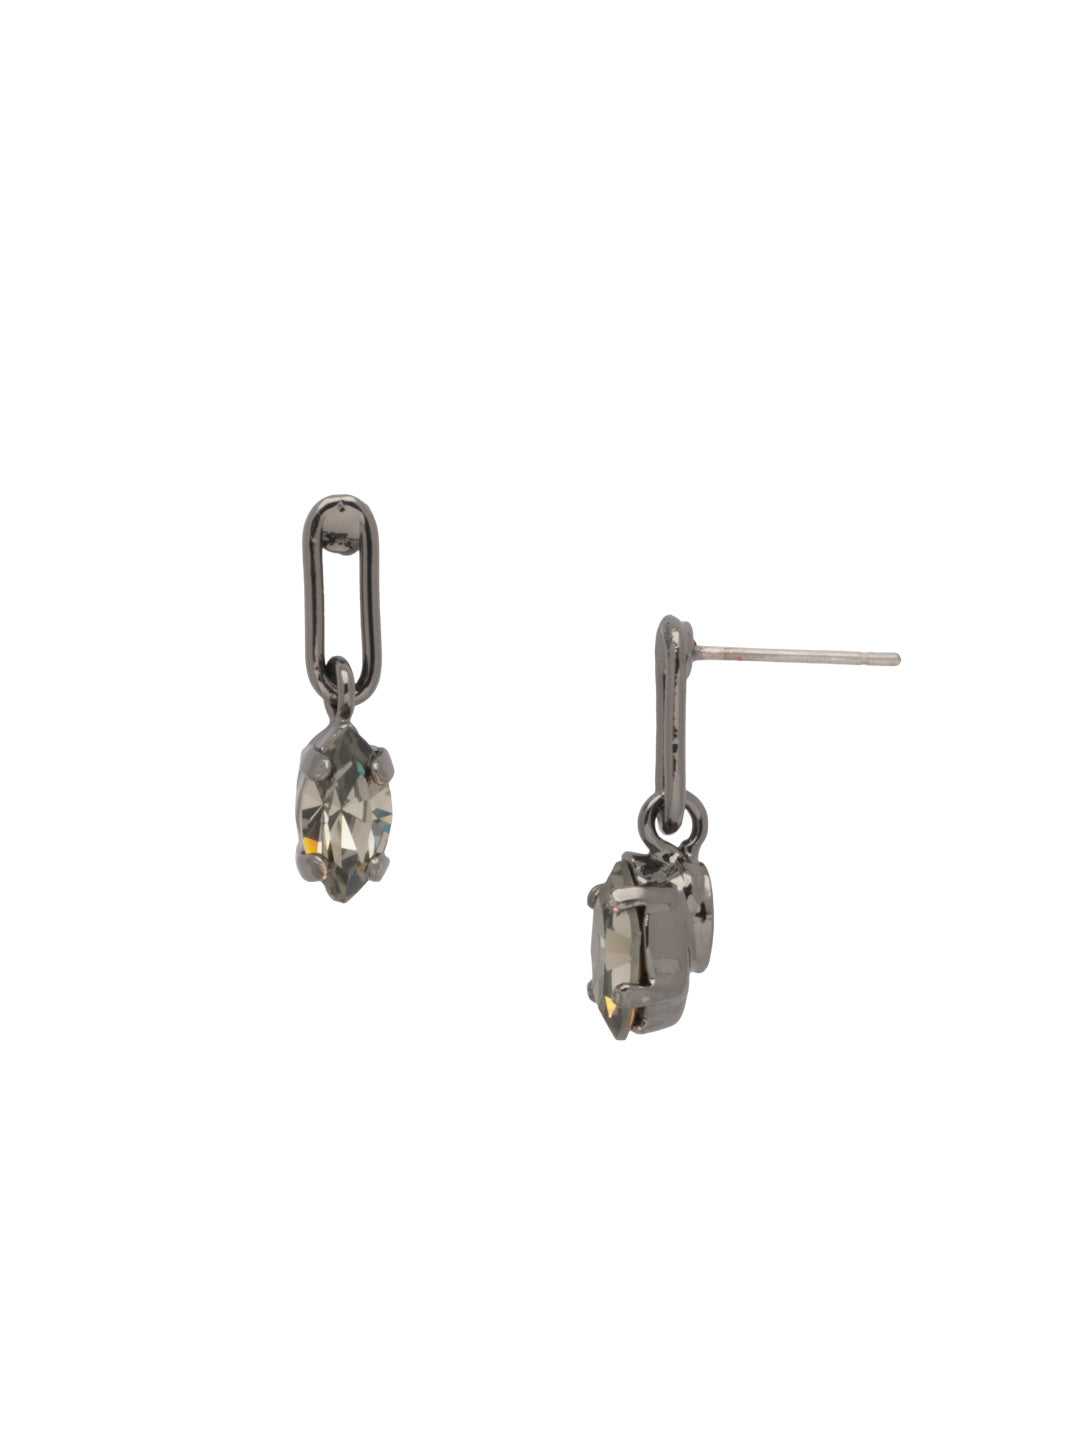 Clarissa Chain Link Dangle Earrings - EFL66GMBD - <p>The Clarissa Chain Link Dangle Earrings feature a navette cut crystal dangling from a single chain link on a post. From Sorrelli's Black Diamond collection in our Gun Metal finish.</p>